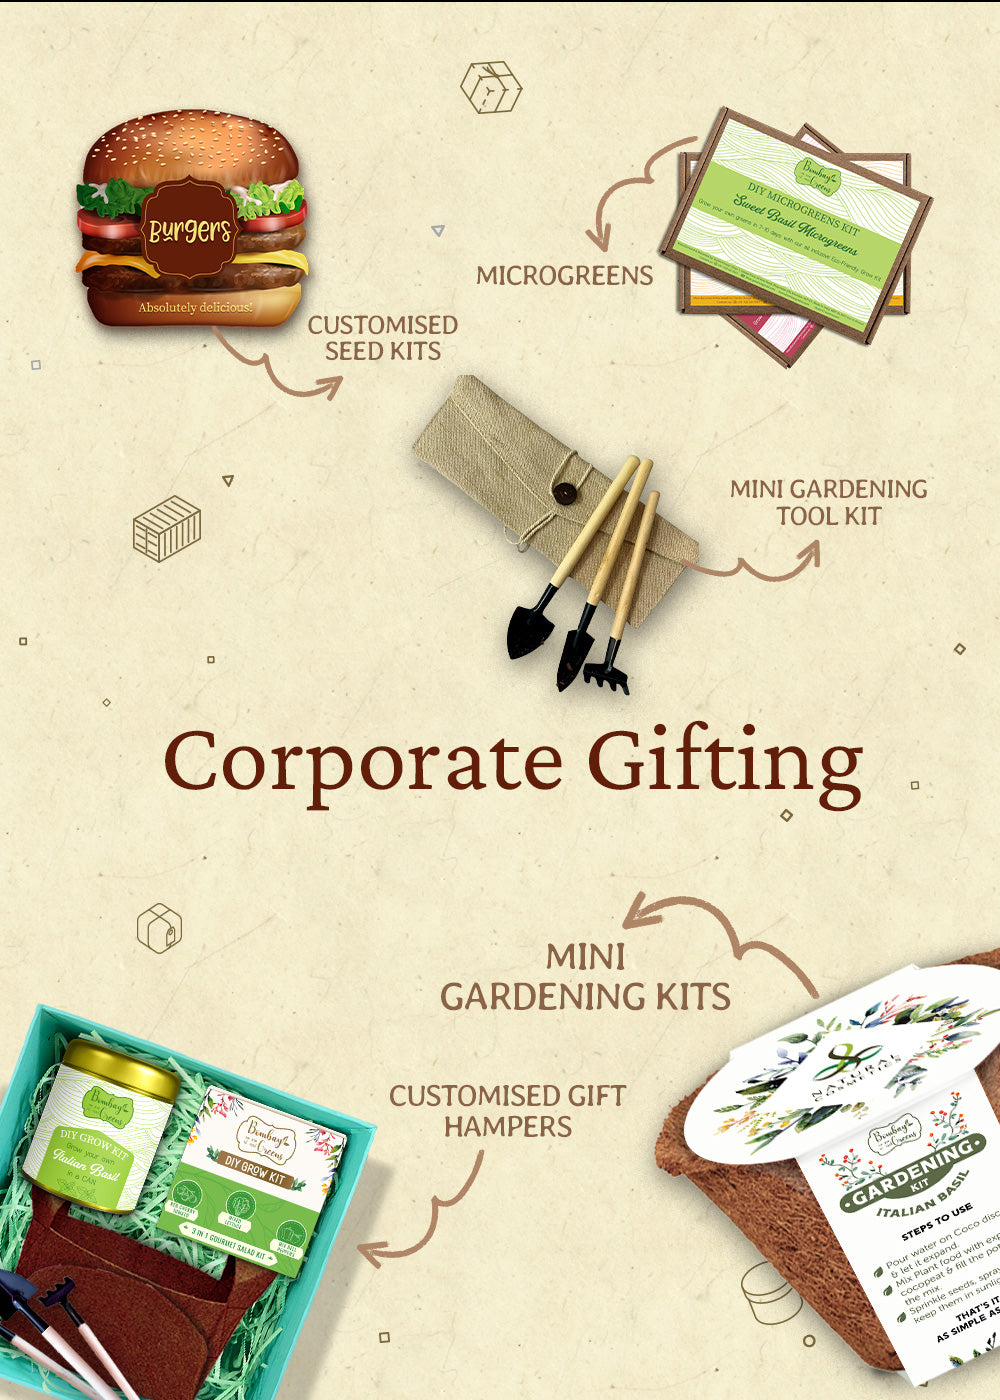 What are the latest trends in sustainable corporate gifting? - Quora